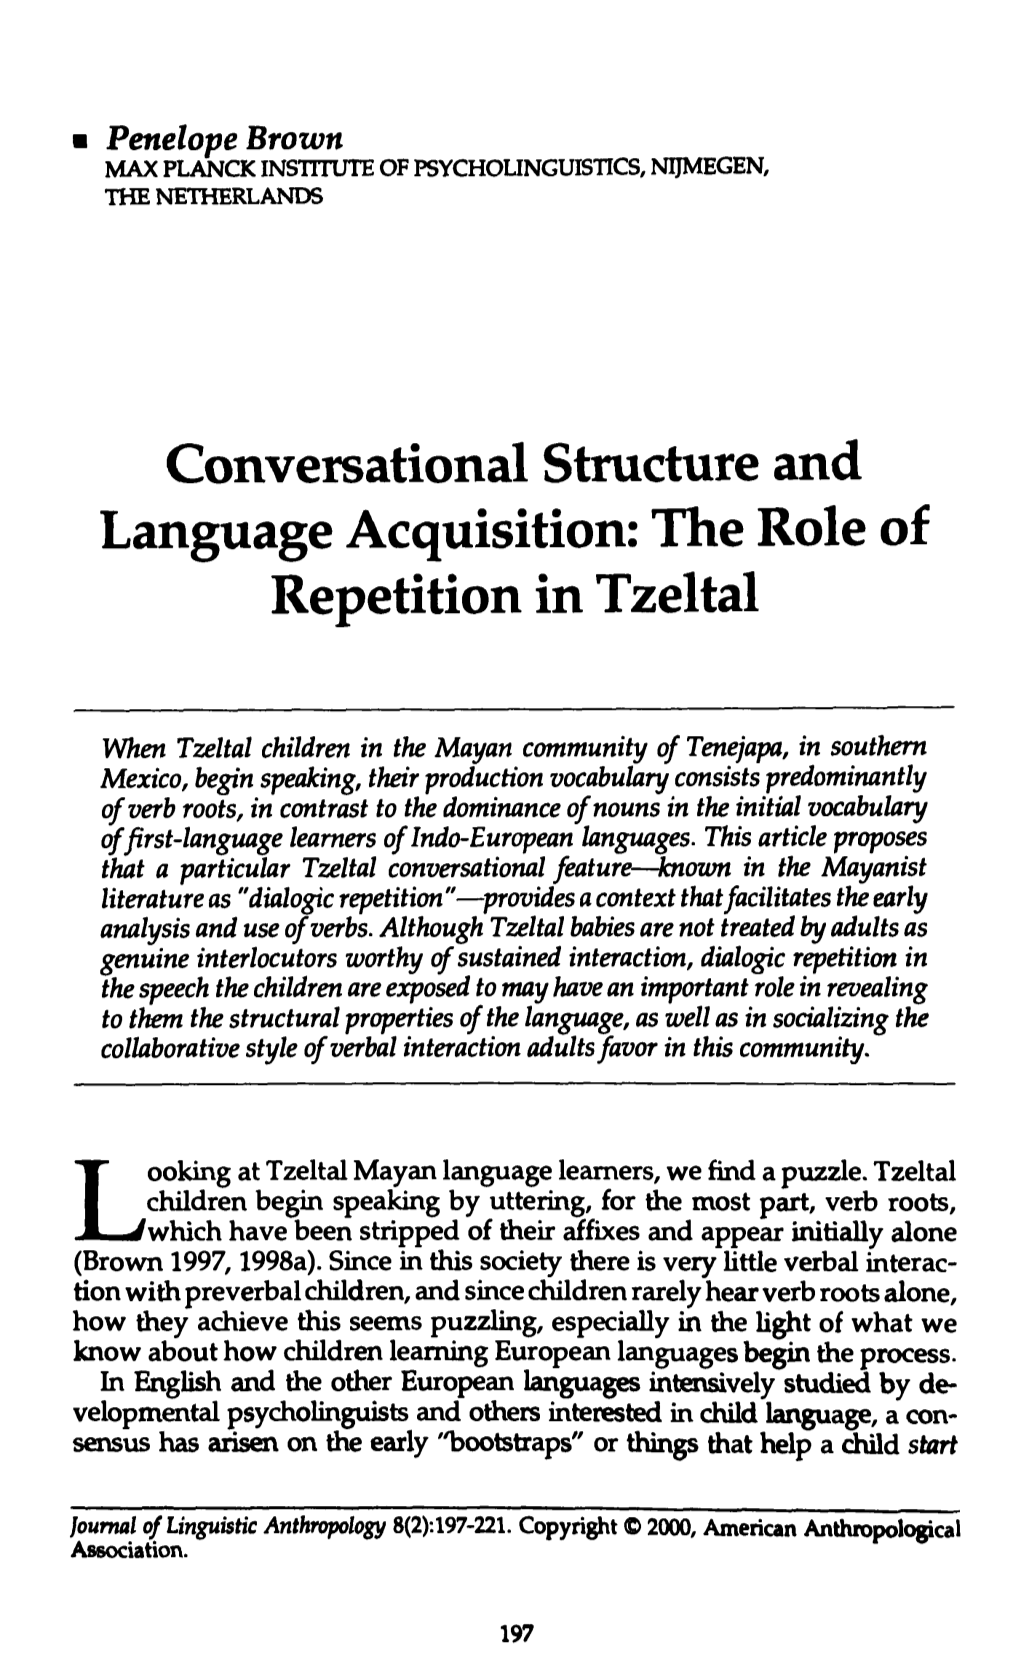 Conversational Structure and Language Acquisition: the Role of Repetition in Tzeltal